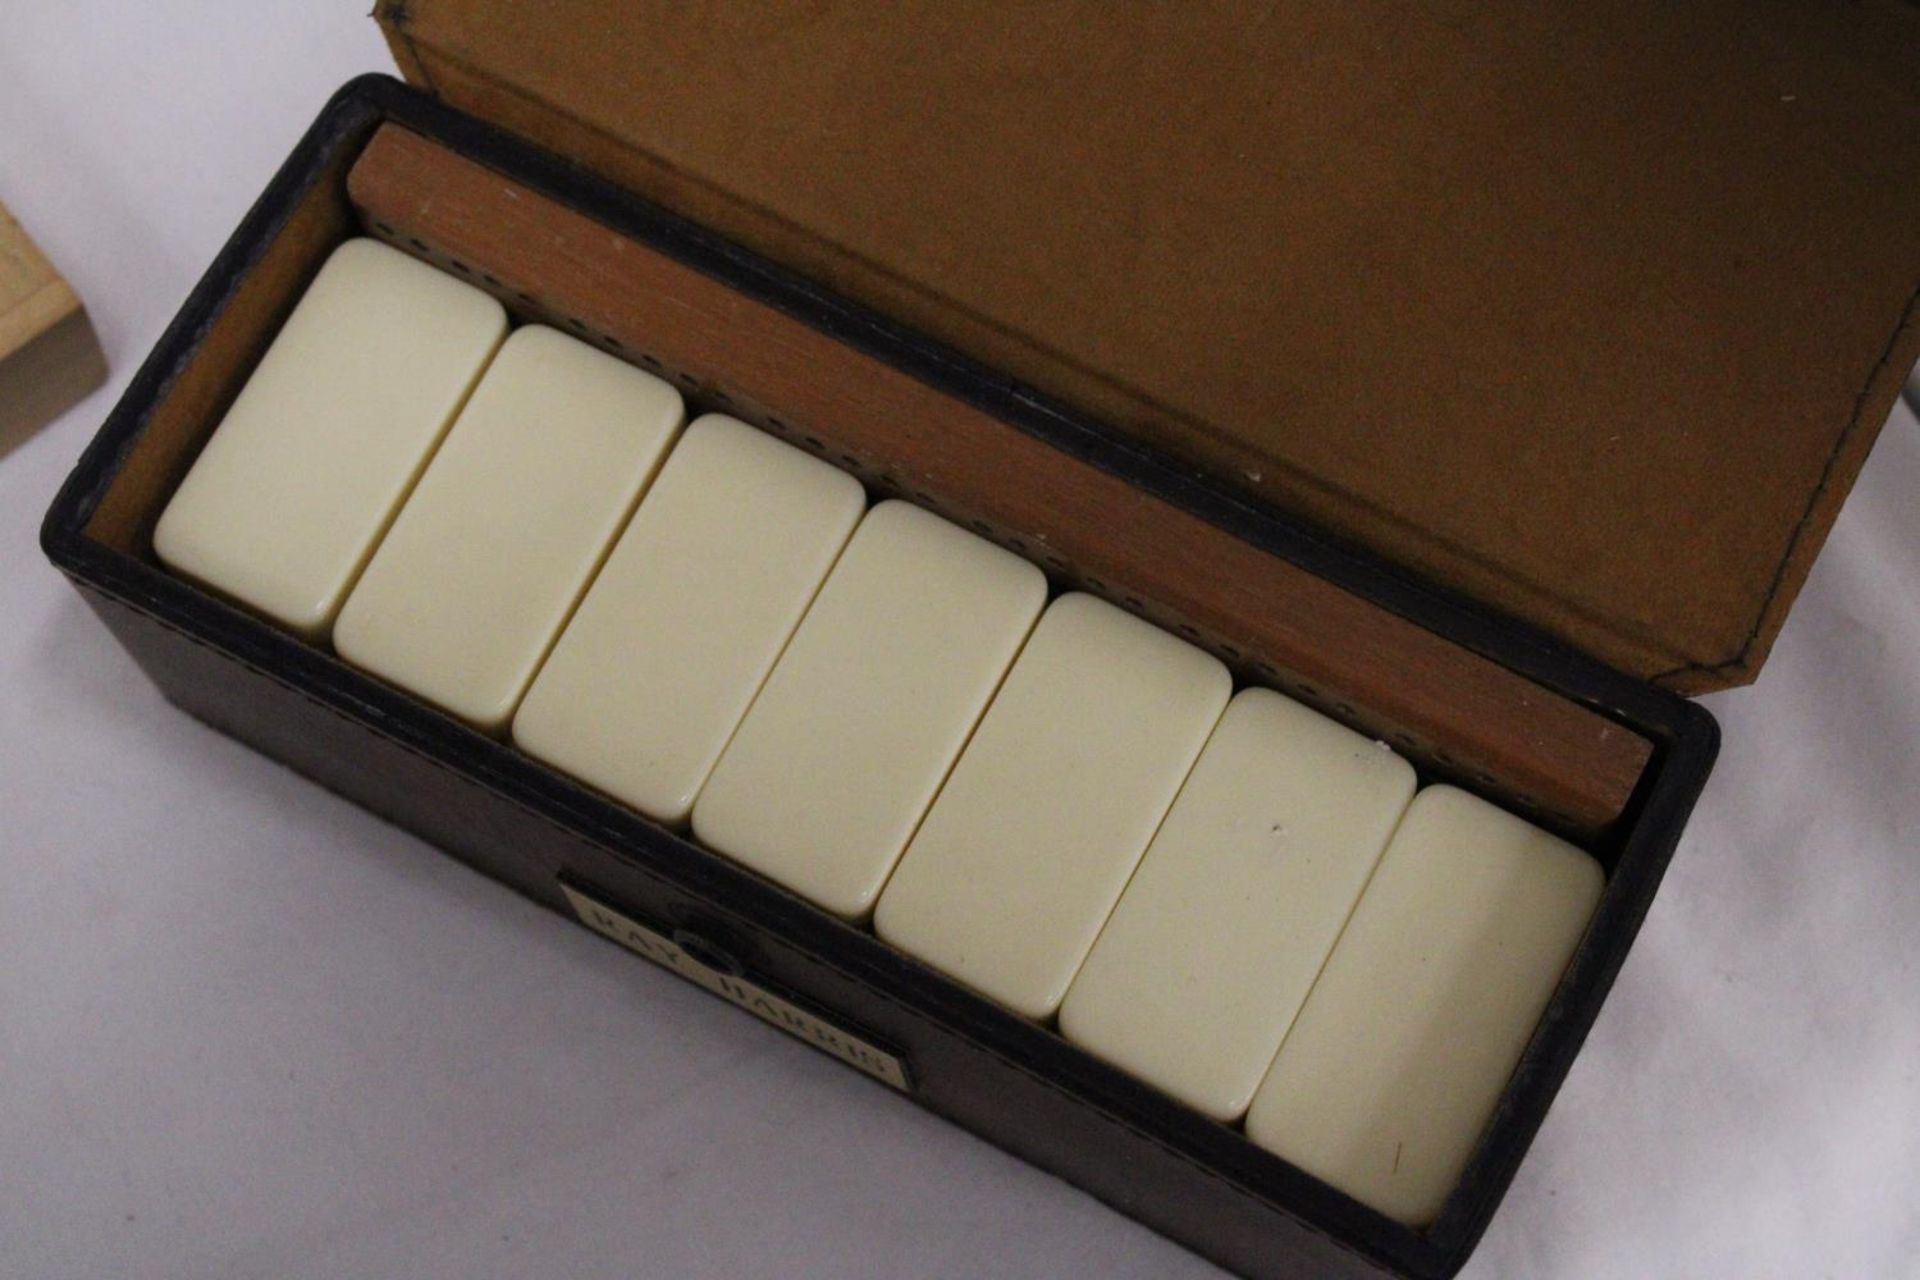 TWO BOXED DOMINO SETS WITH SCORE BOARD - Image 3 of 4